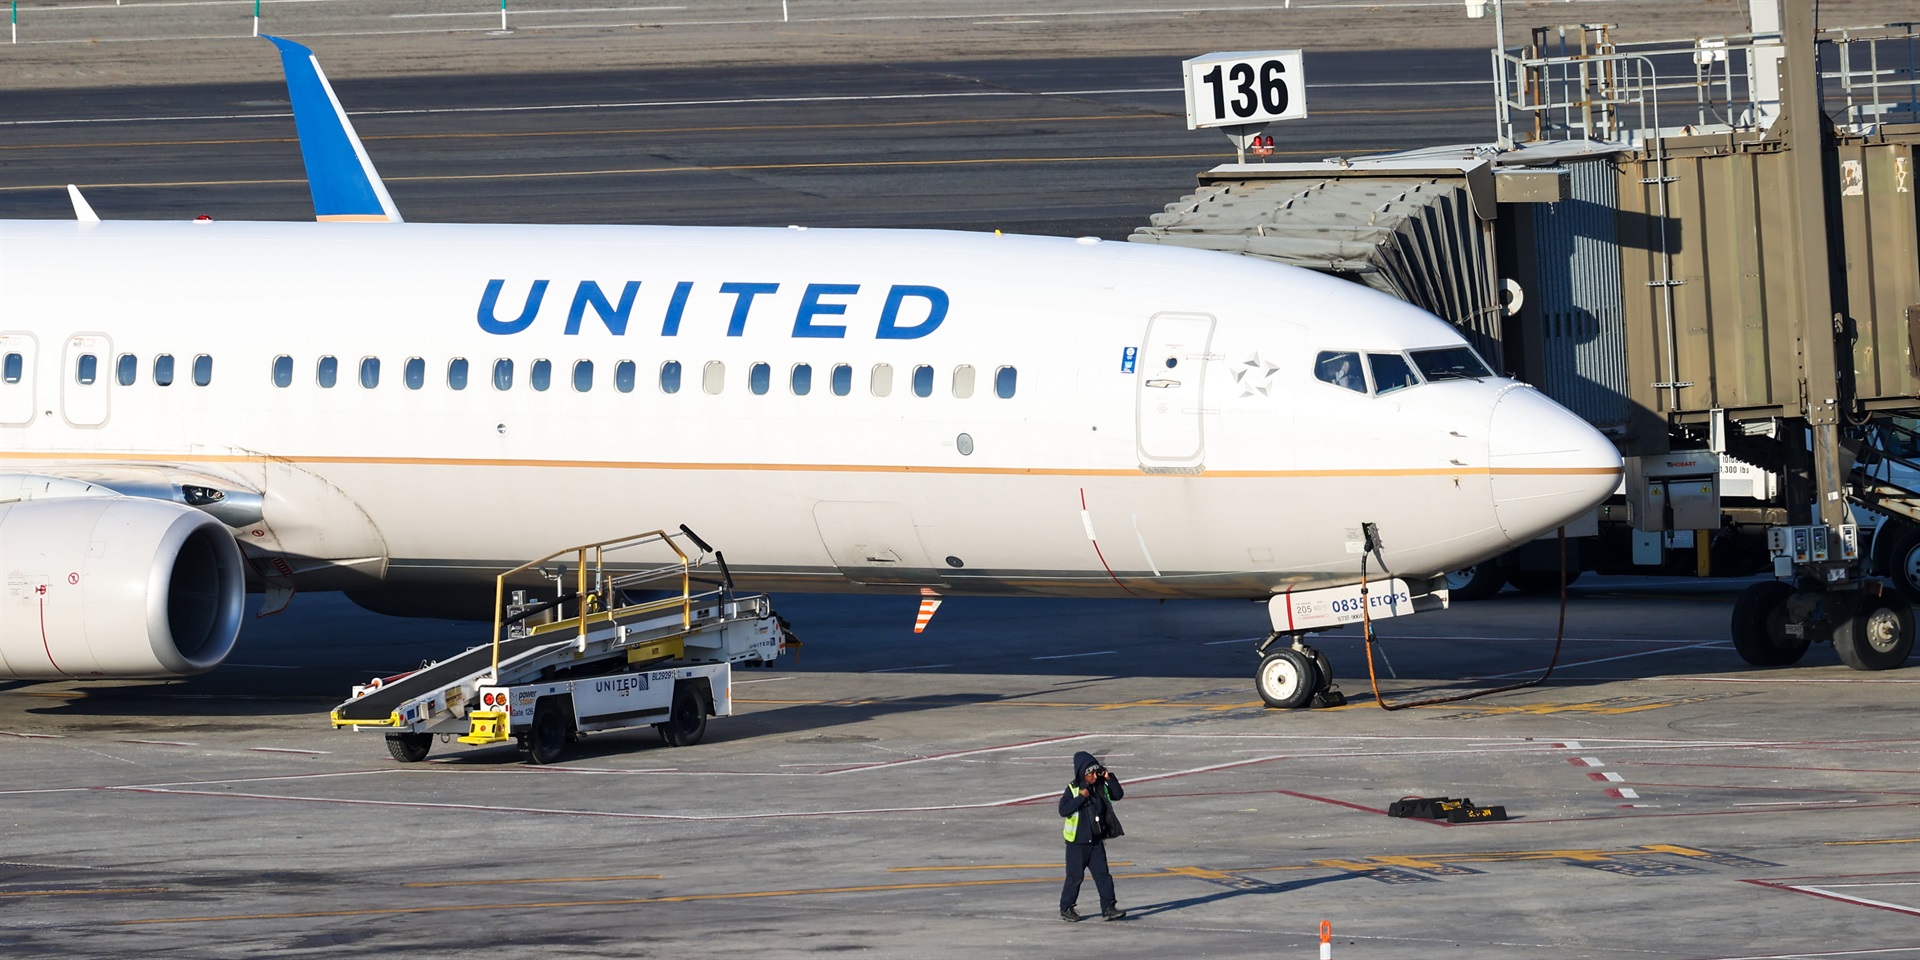 A United Airlines airplane at the Newark Liberty International Airport. Not the one in the story. ayfun Coskun/Anadolu Agency via Getty Images